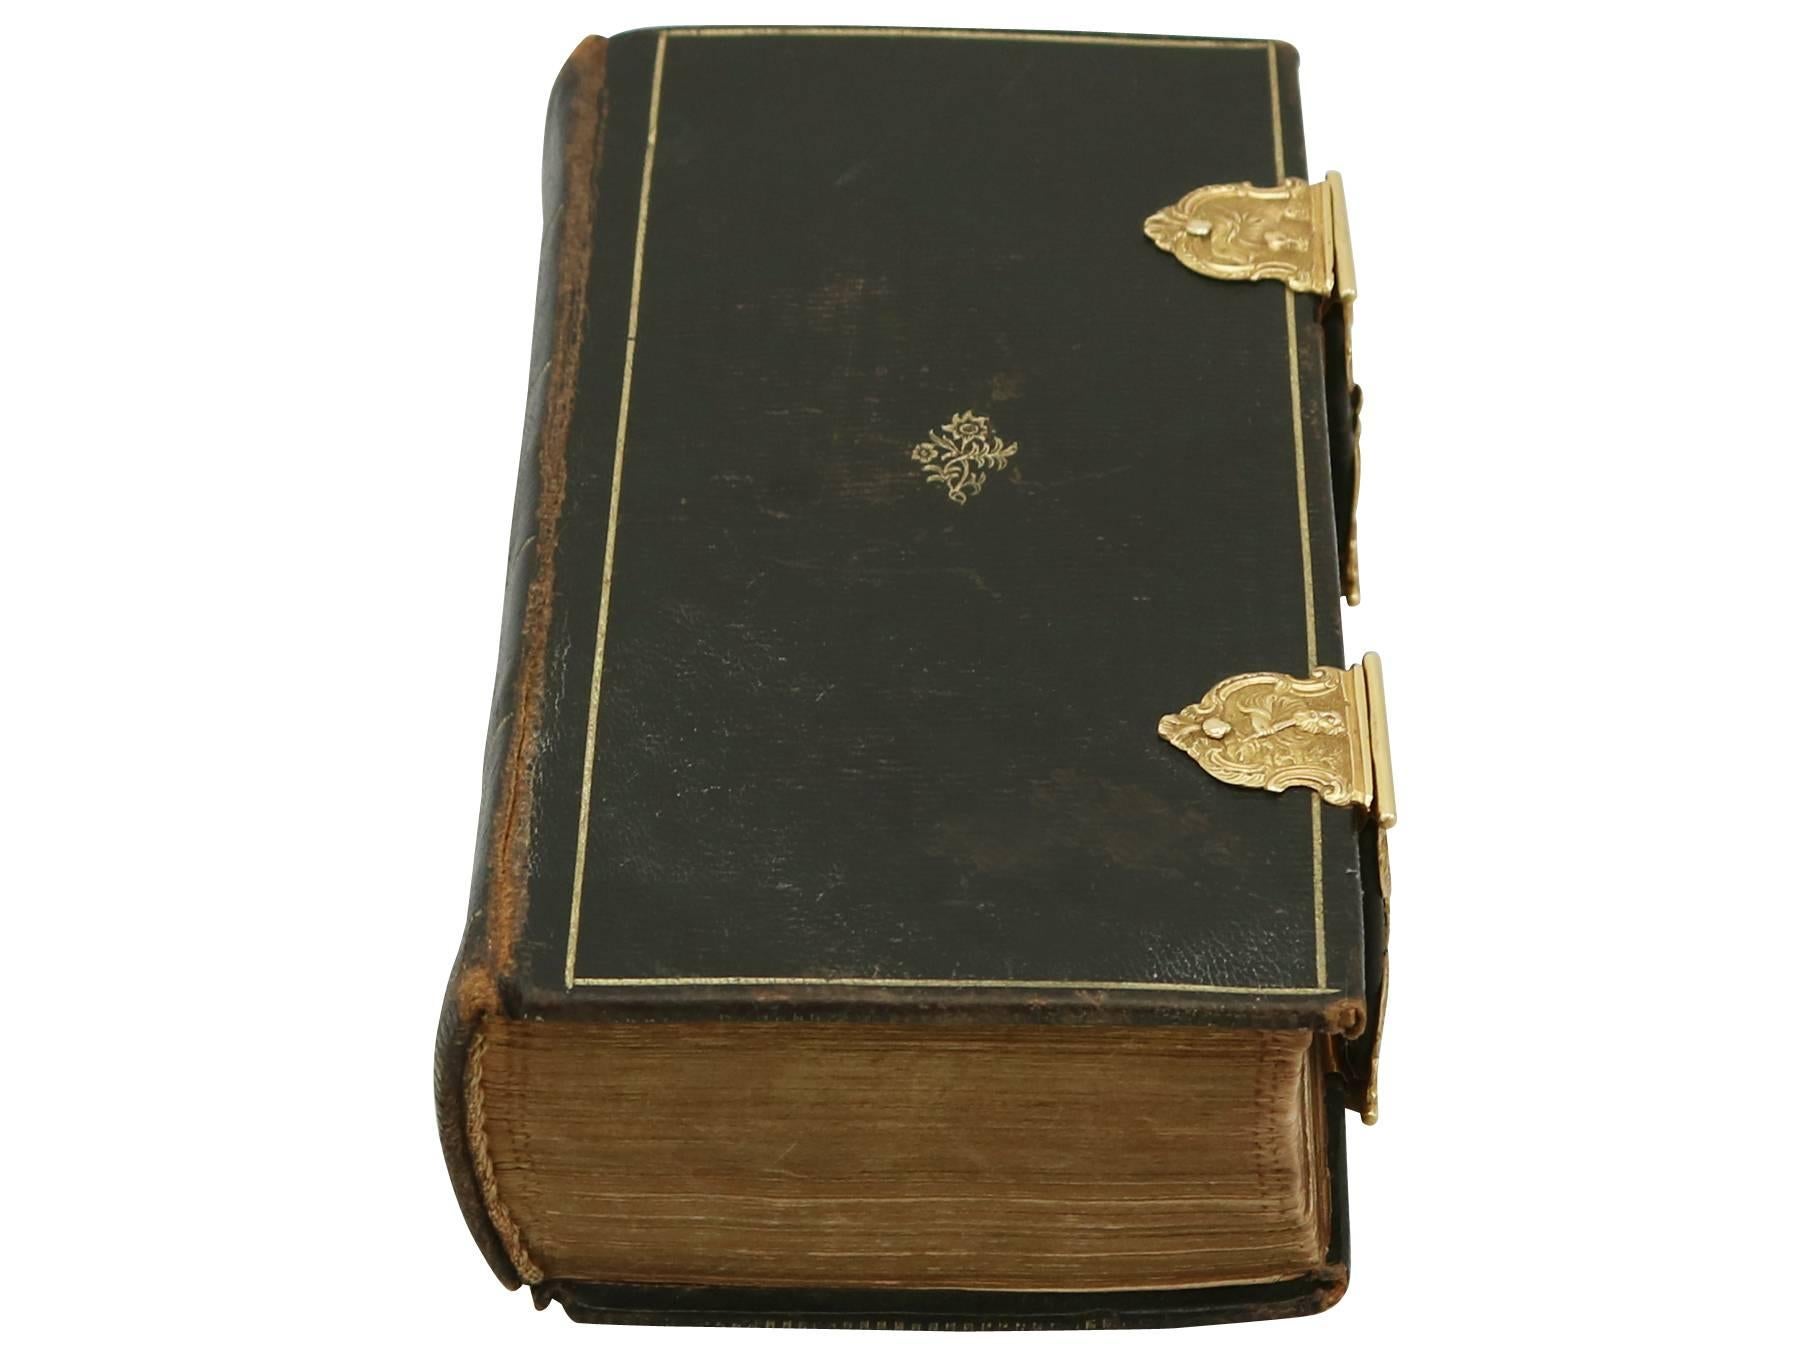 A fine and impressive antique 18th century, Dutch, 20-carat yellow gold mounted bible; an addition to our diverse range of collectable continental pieces.

This impressive antique Dutch, 20-carat yellow gold mounted Dutch bible has a rectangular